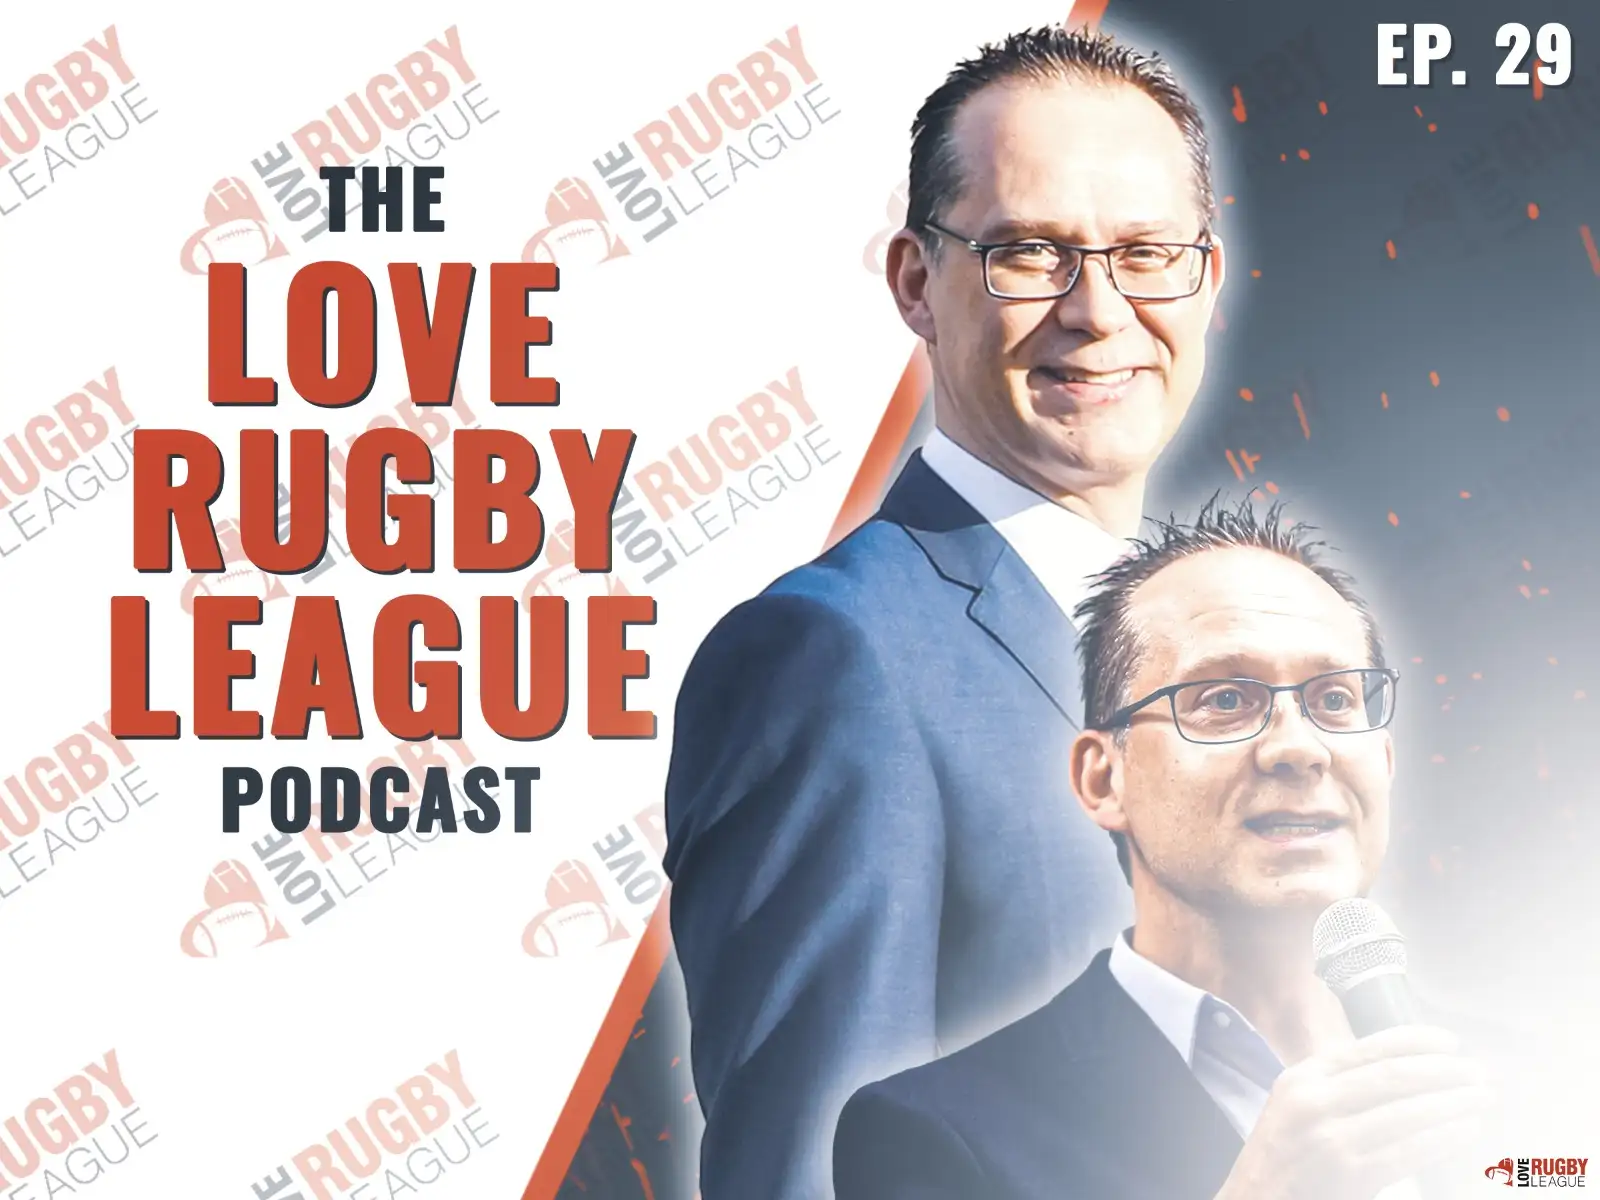 Podcast: Jon Dutton on masterminding the best Rugby League World Cup yet & hopes for revitalising the international game